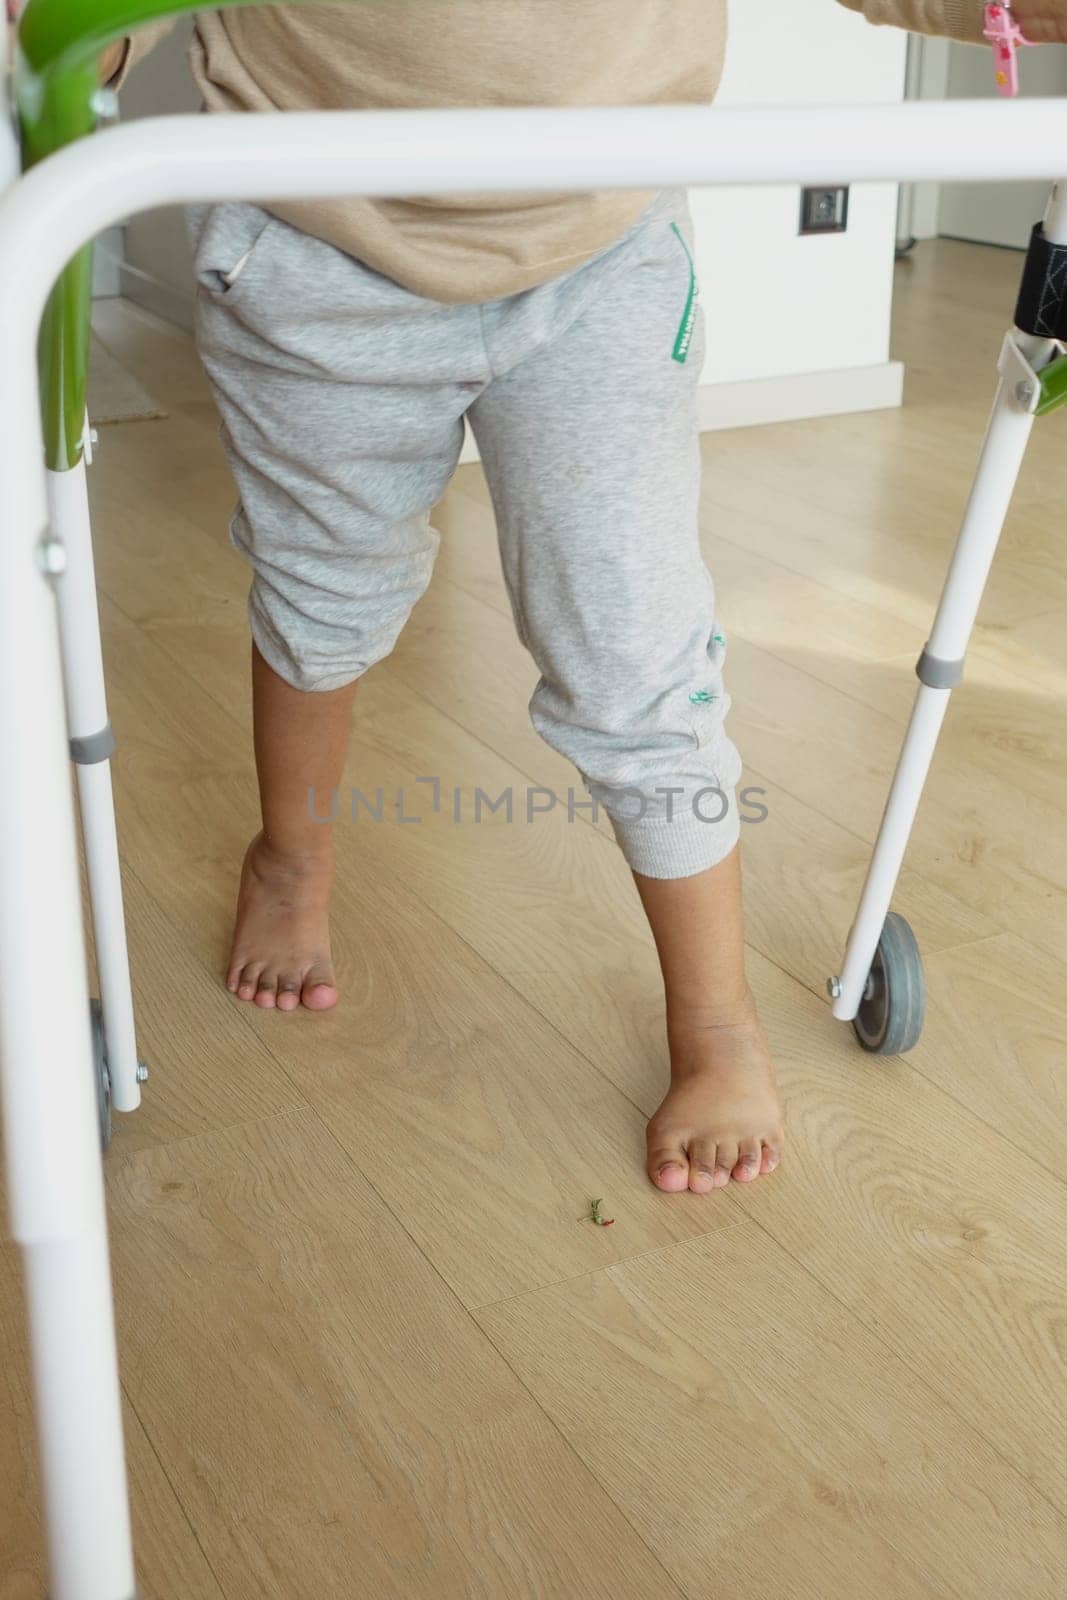 child with walking frame and knee orthosis at home by towfiq007